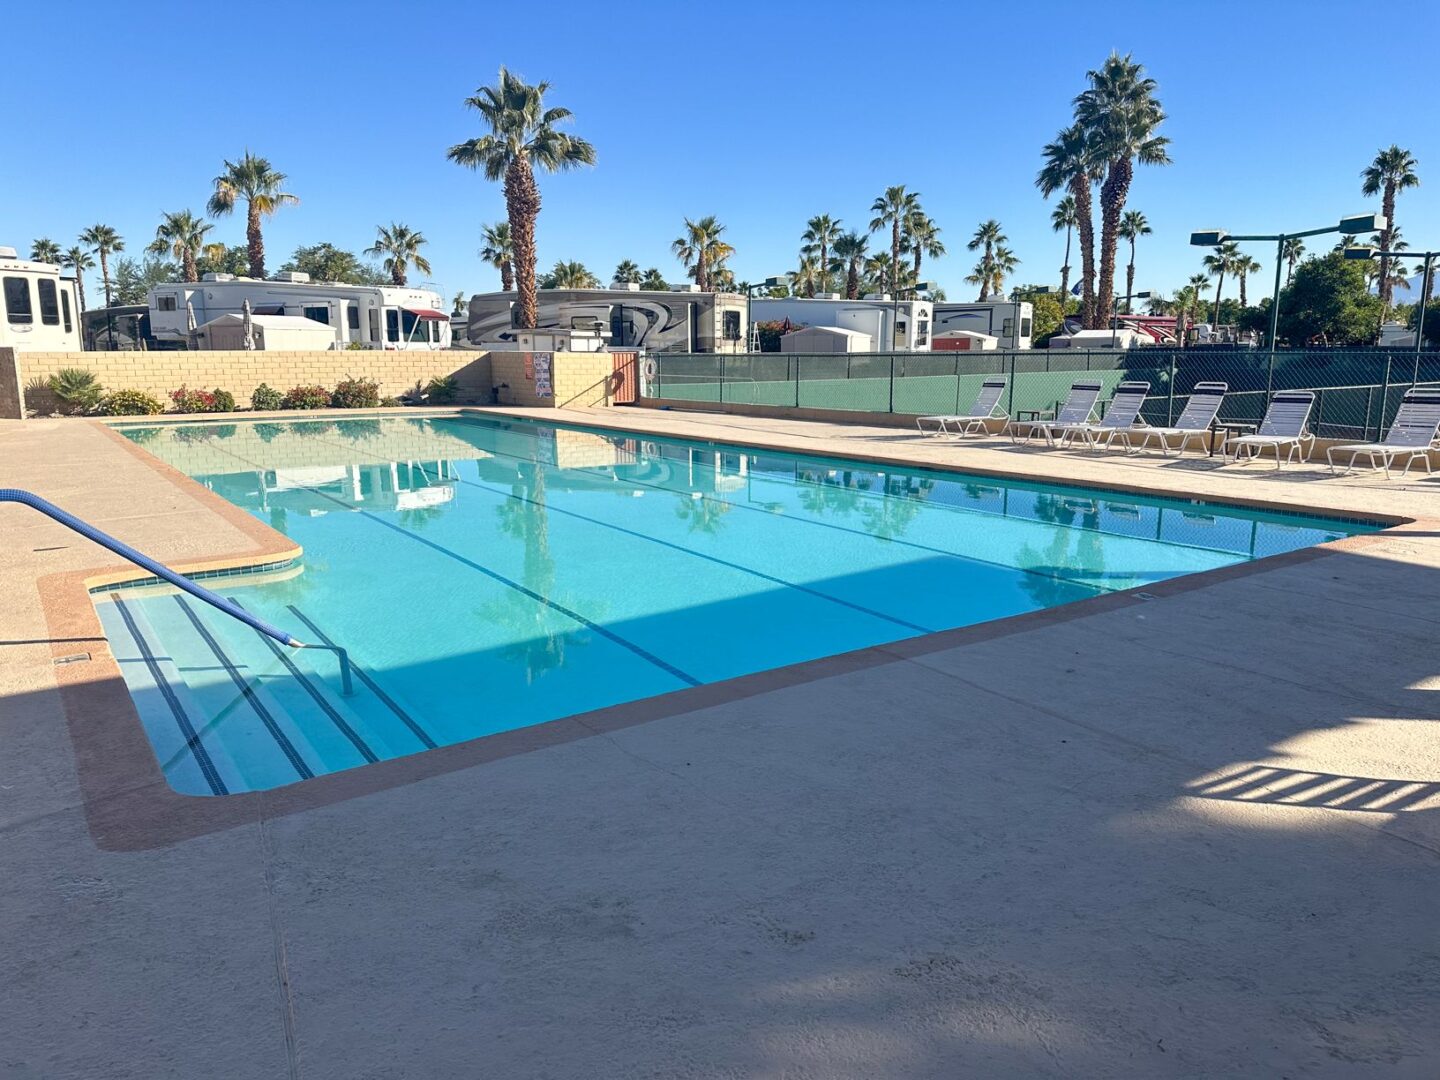 A swimming pool at an rv park in palm springs, california.